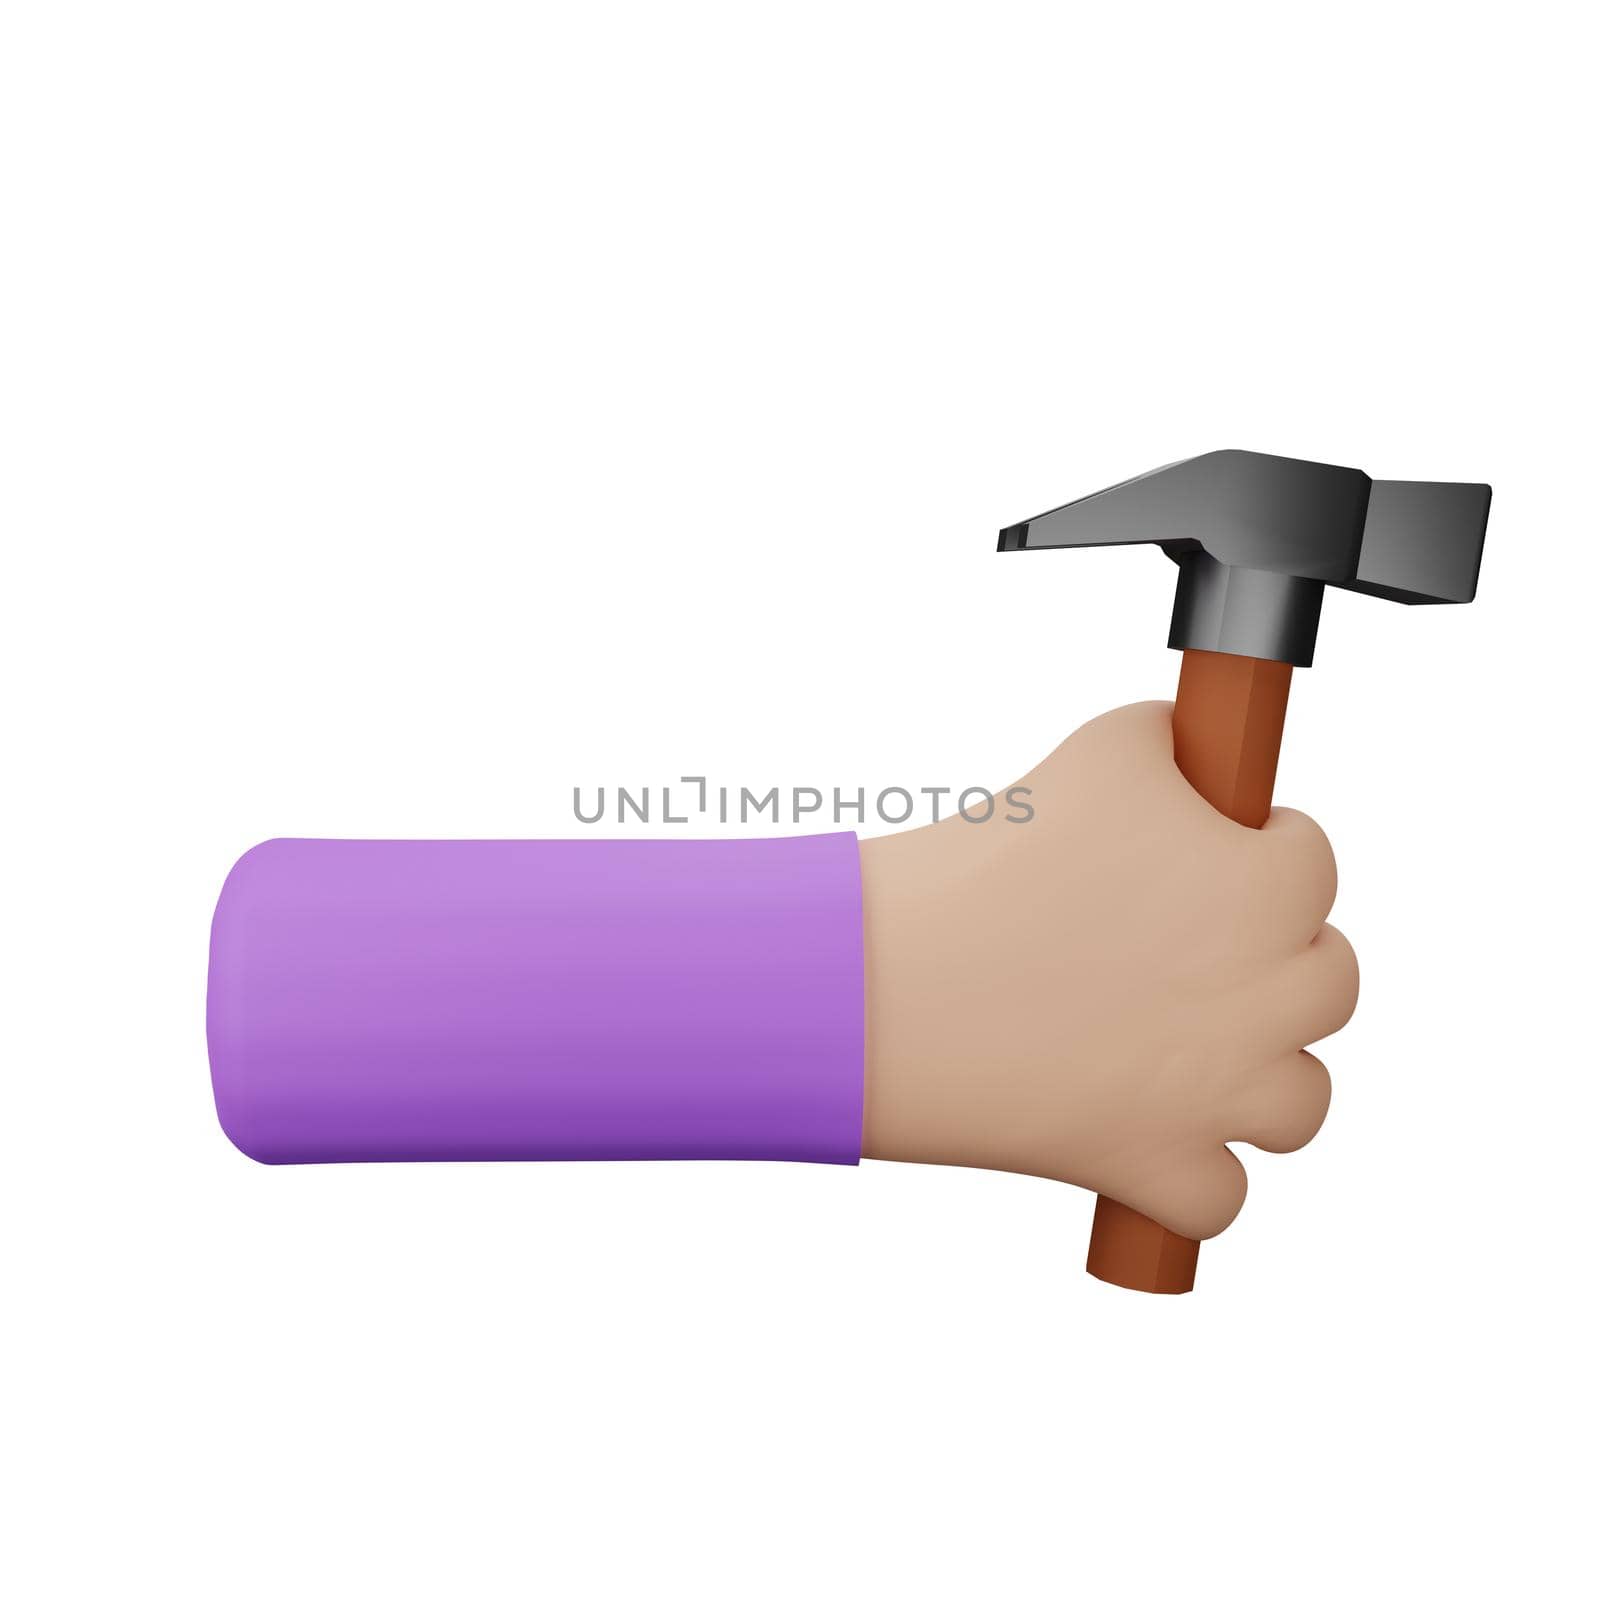 3d rendering of a hand holding a tool hammer